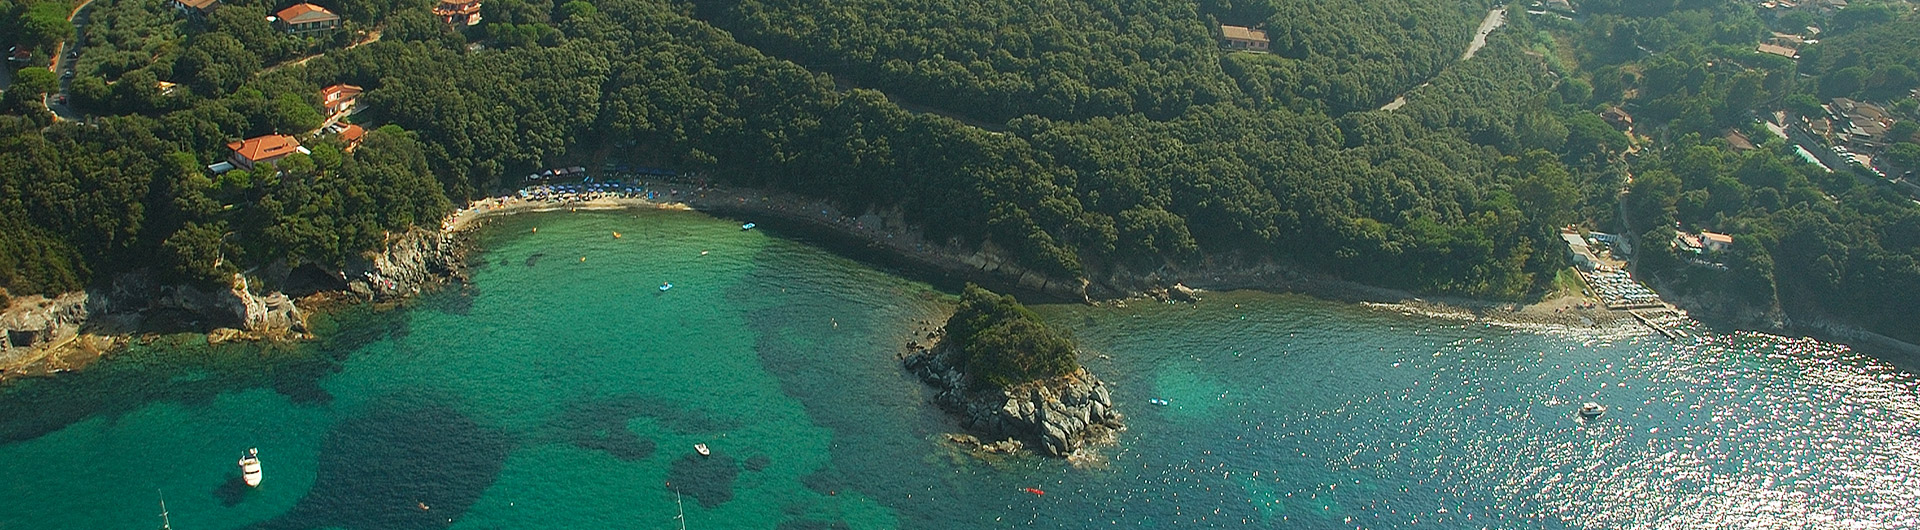 Hotels Edera and Casa Rosa, vacation on the most beautiful beaches of Elba island 